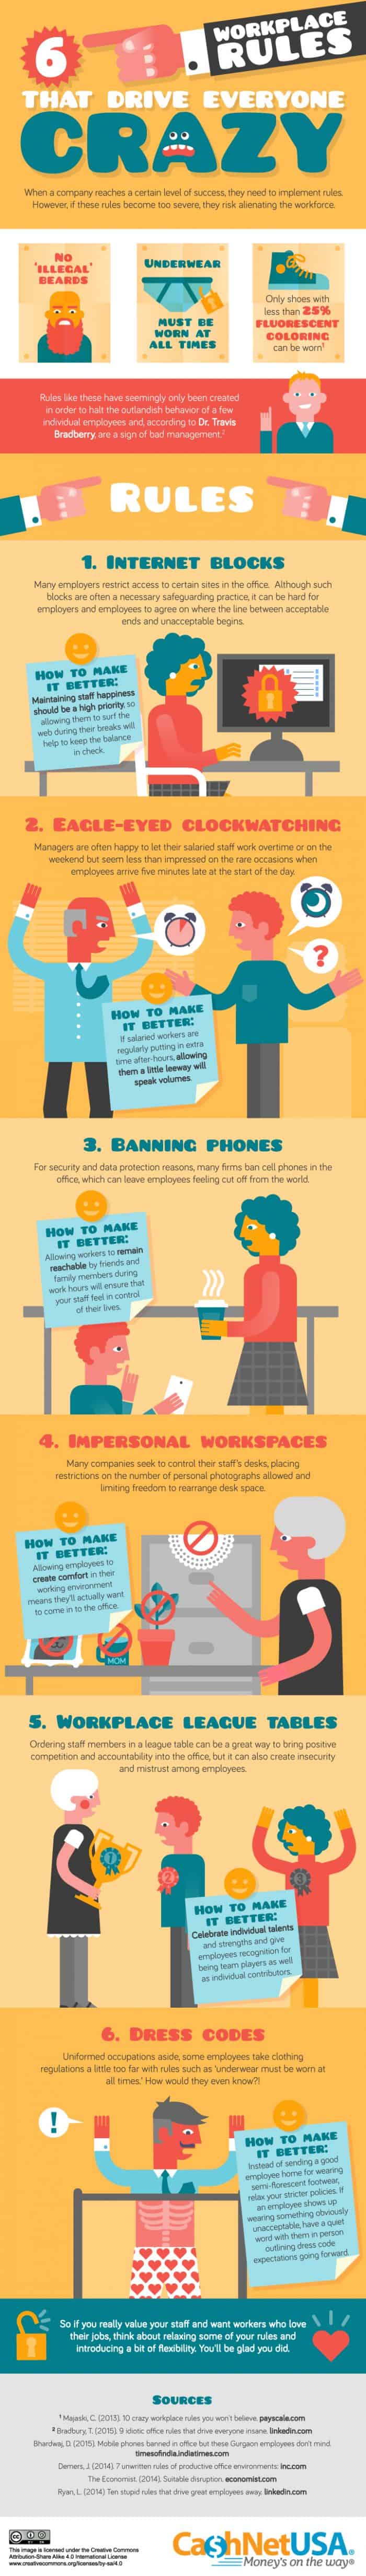 6 Workplace Rules that Drive Everyone Crazy